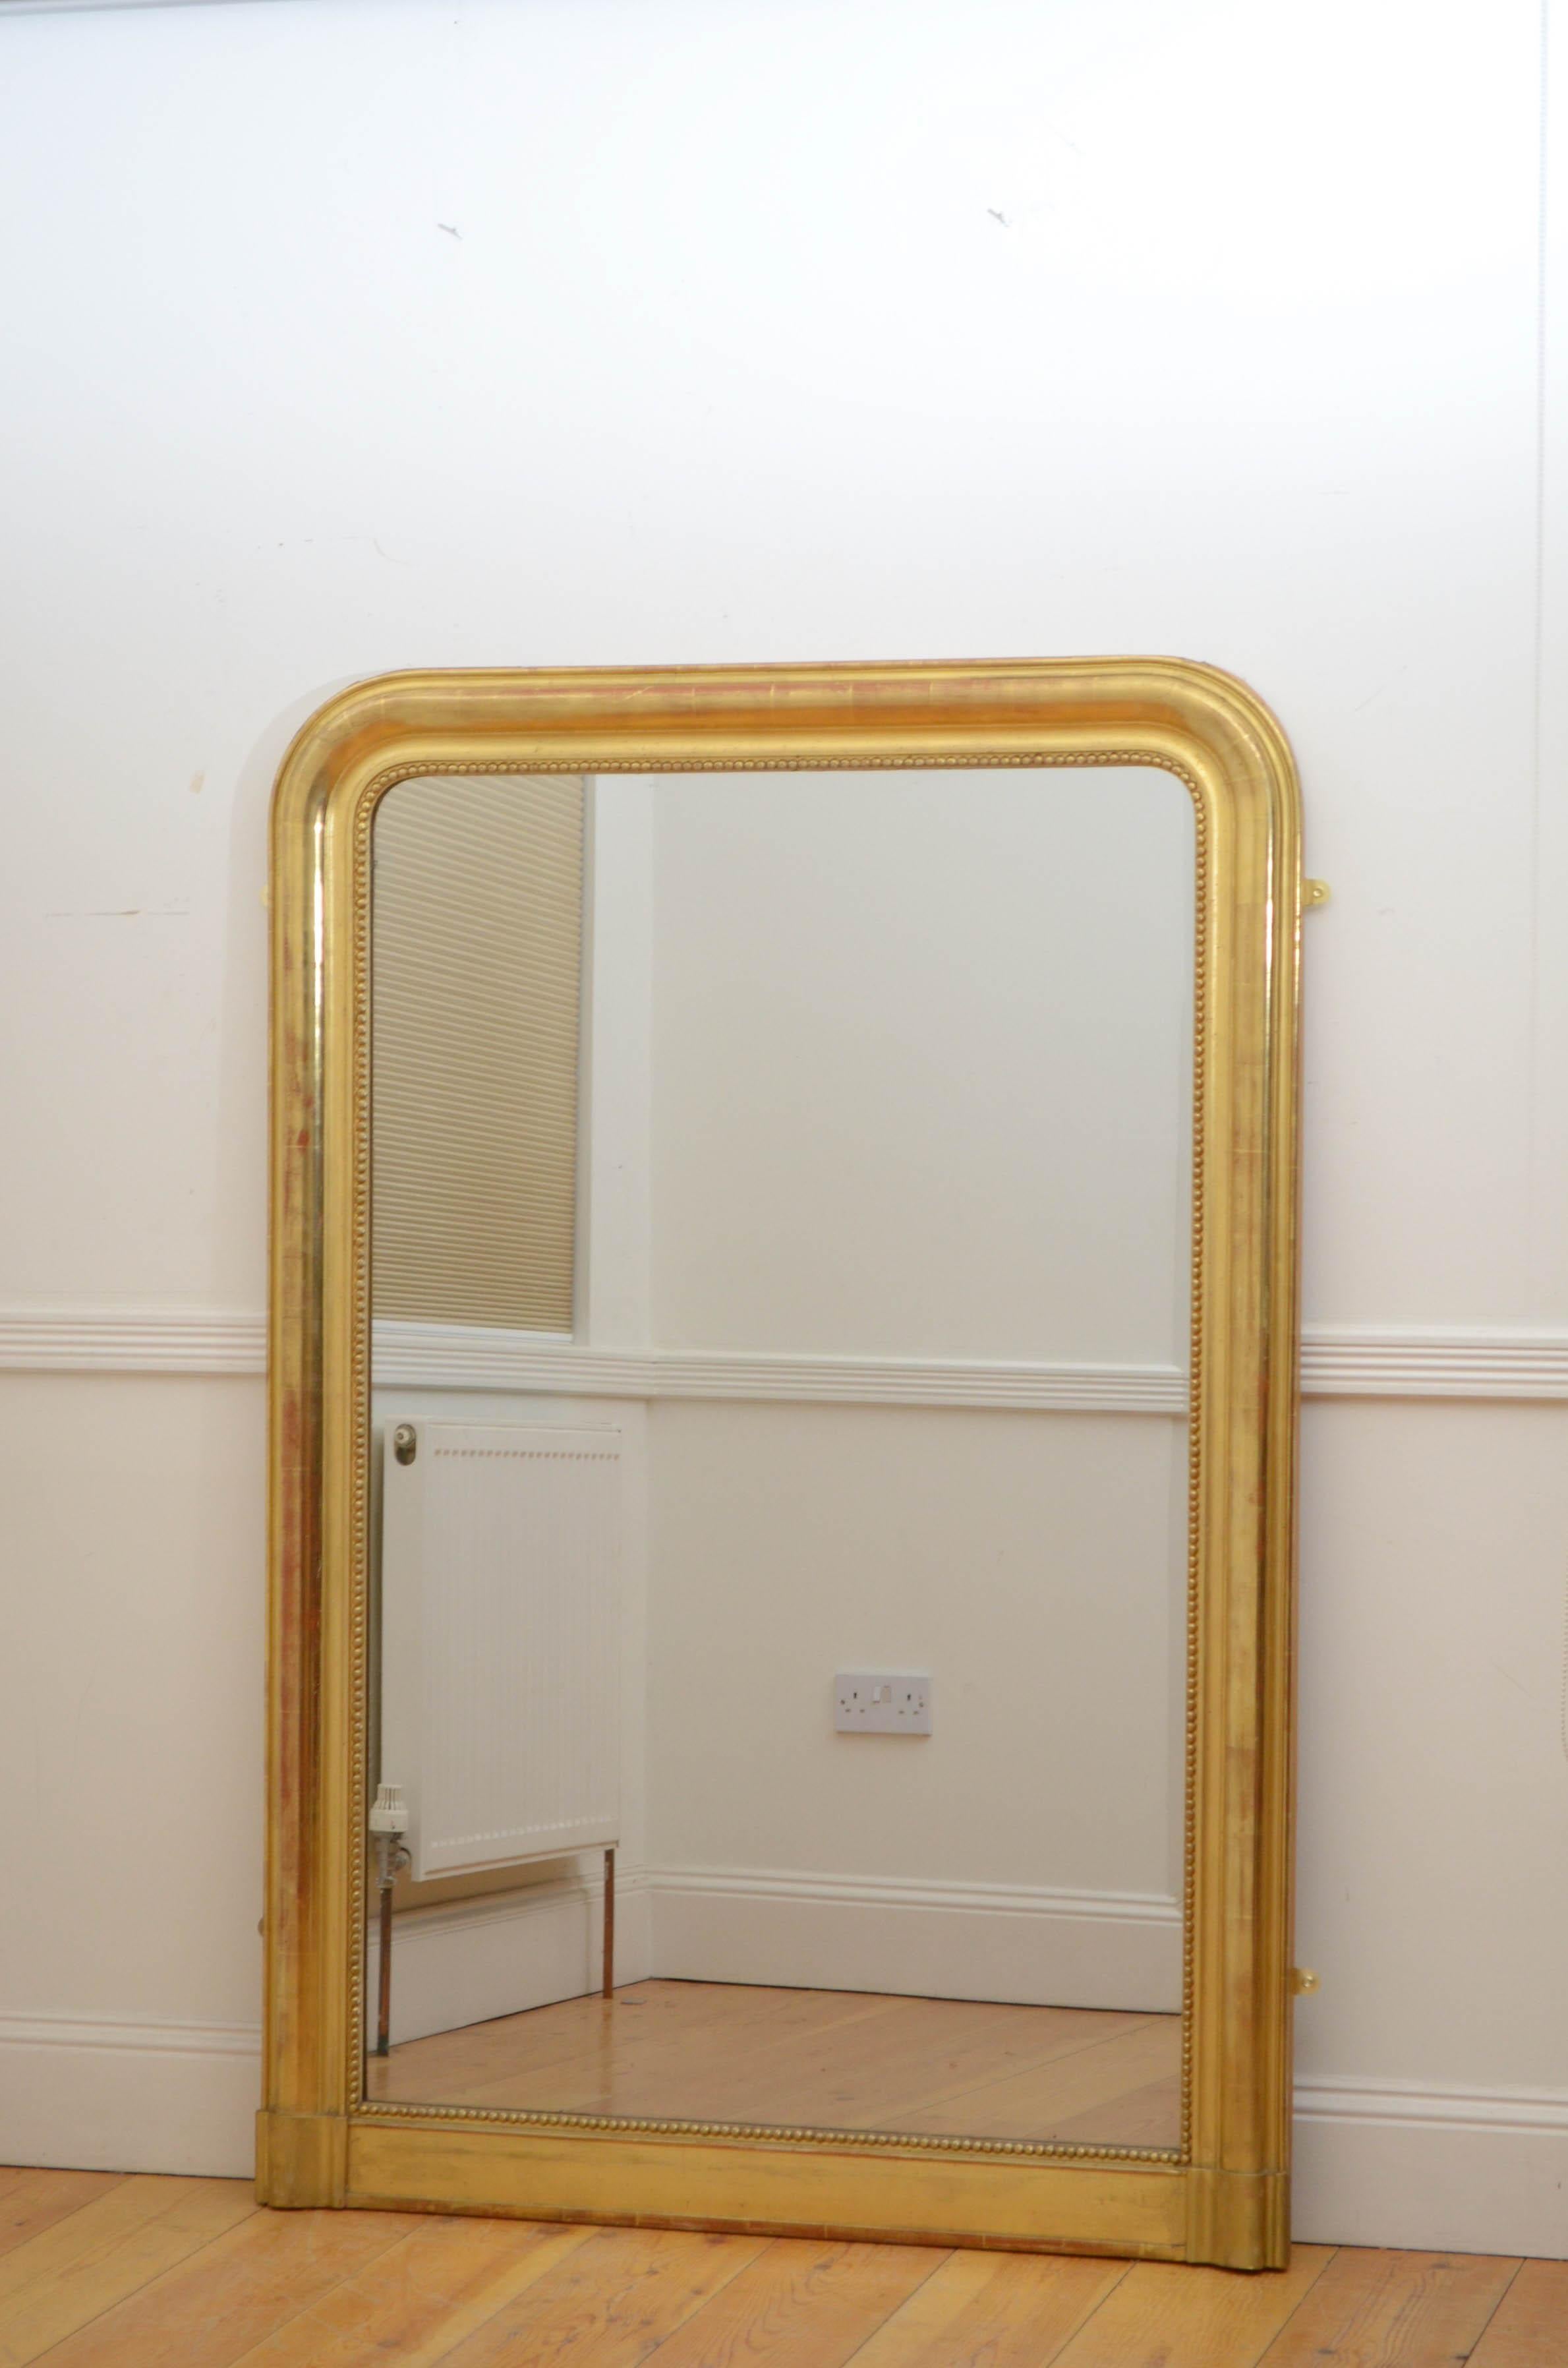 Sn5208 Fine Louis Philippe mirror giltwood wall mirror, having original foxed glass in beaded and moulded gilded frame with arched top corners. This antique retains its original glass, gilt and backboards, all in wonderful home ready condition.